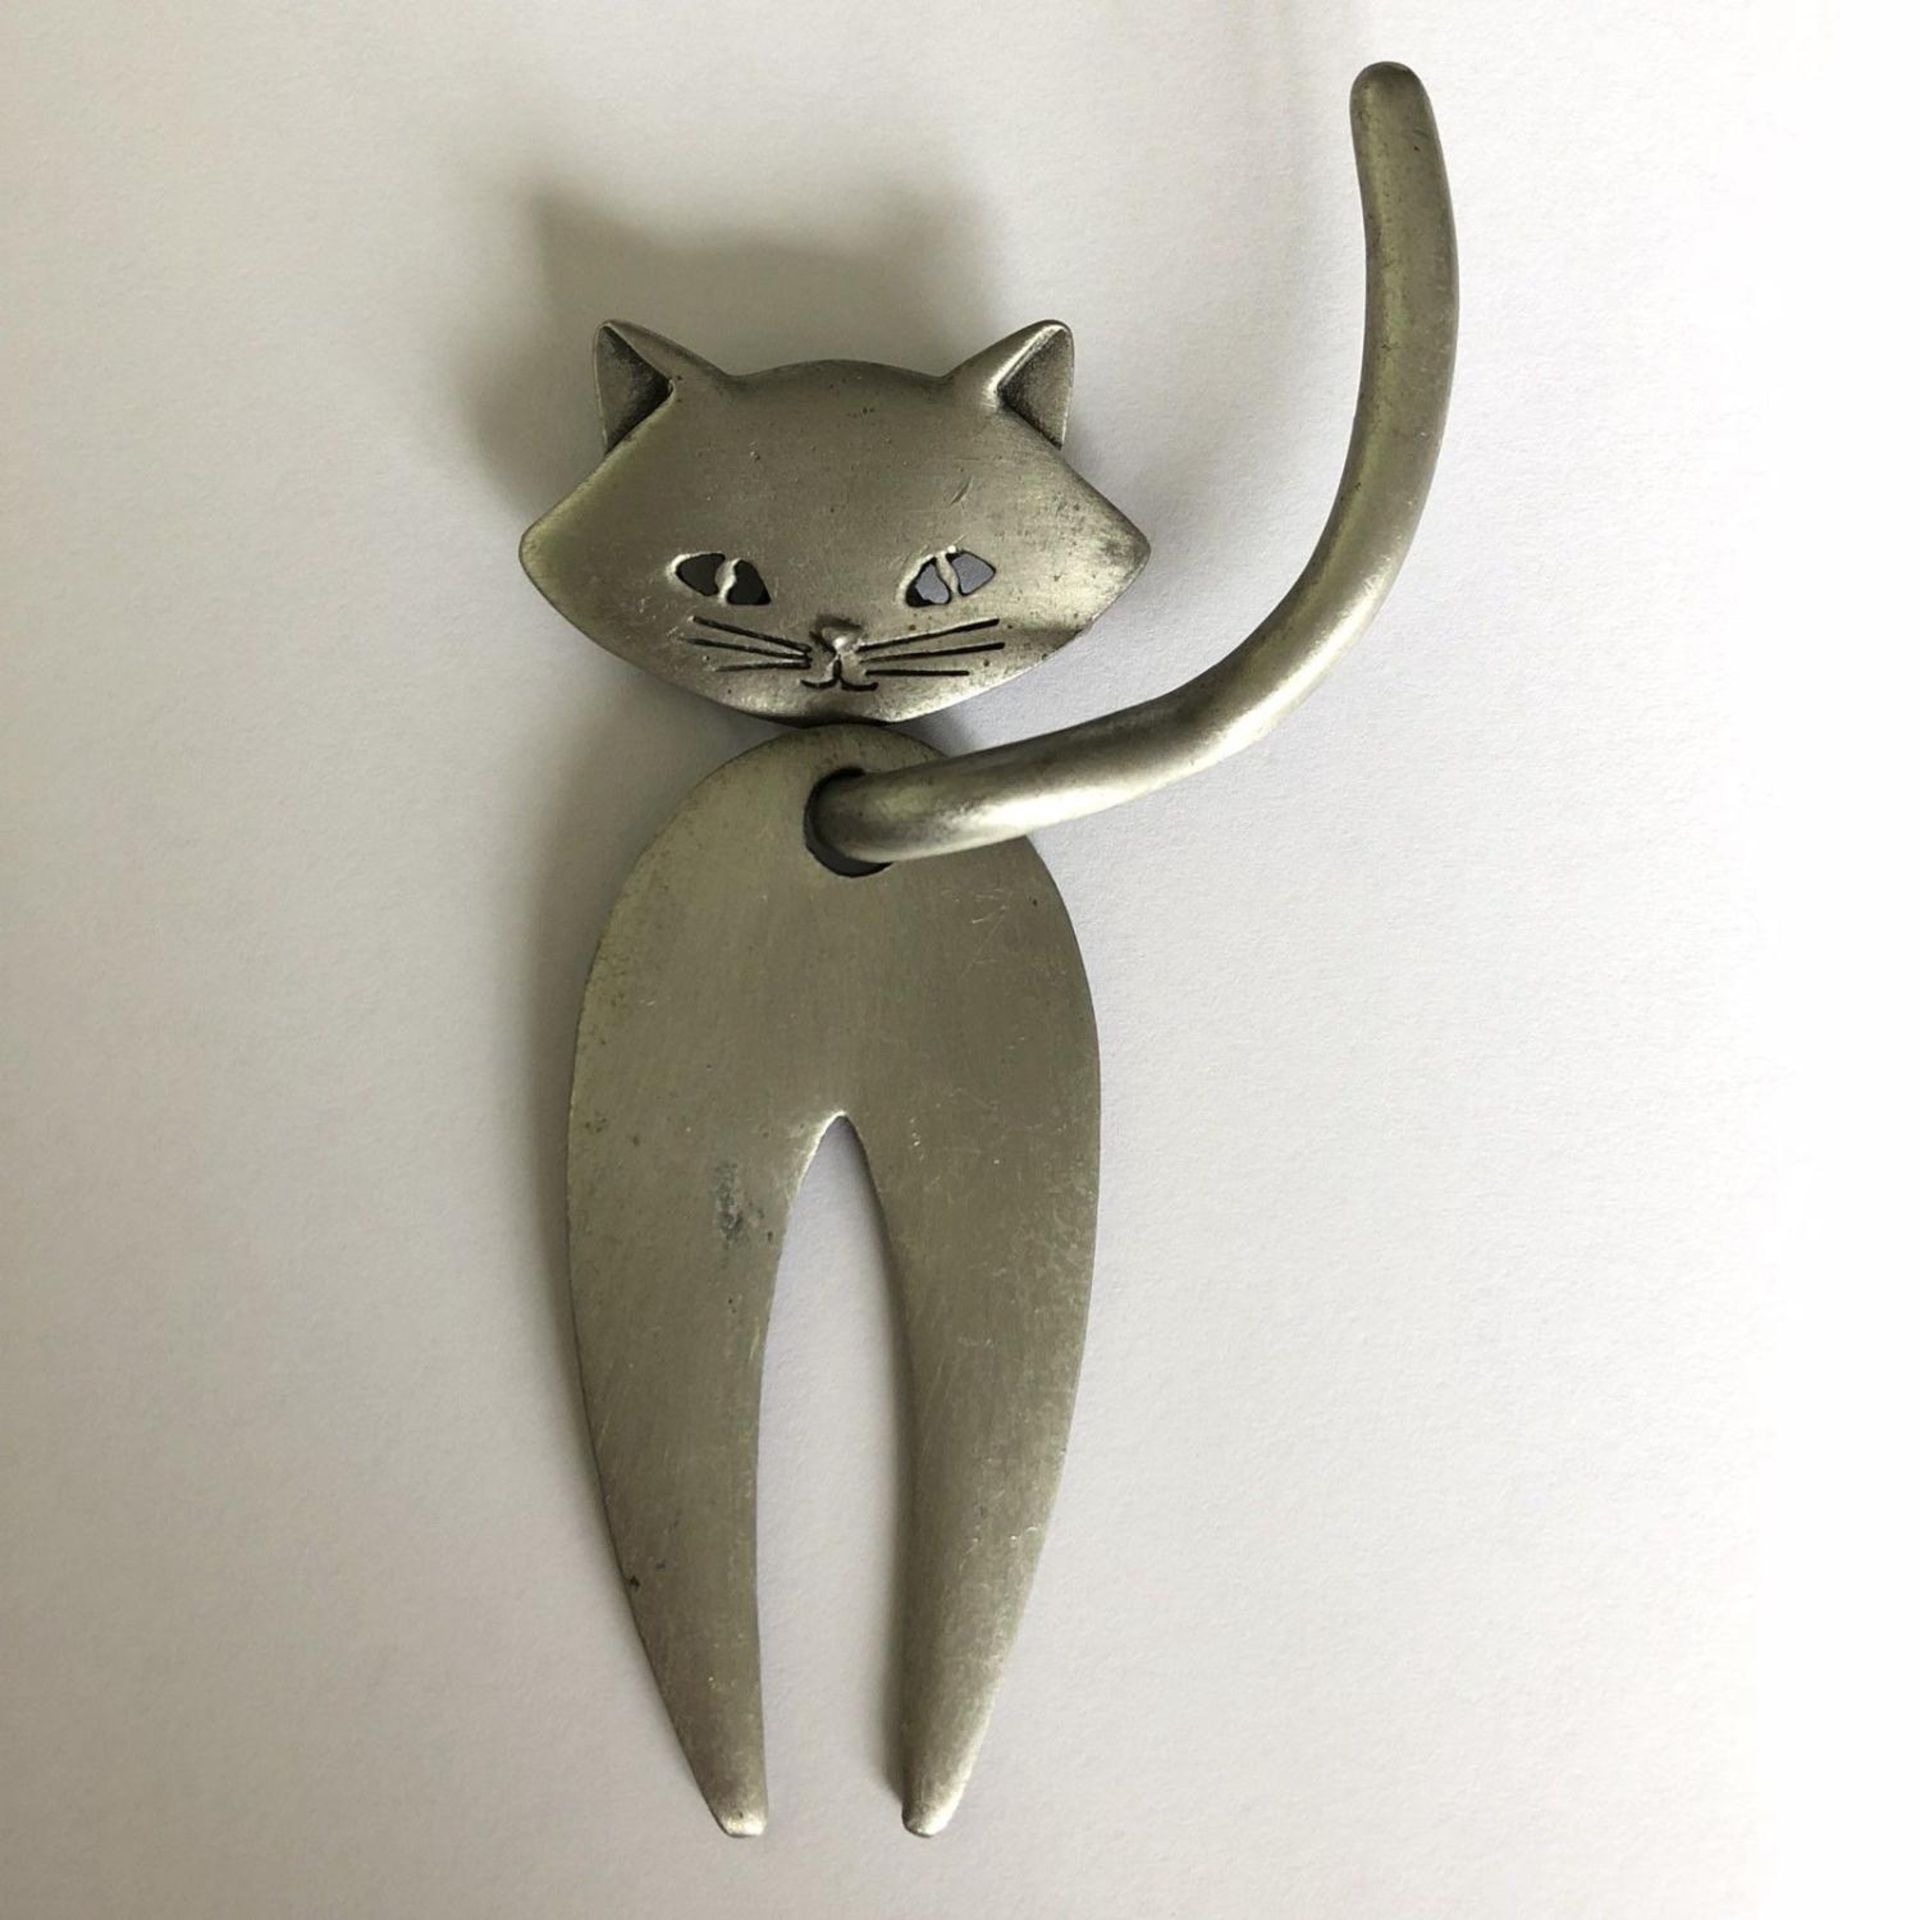 Vintage Signed JJ pewter Long Tailed Articulated Cat Brooch/Pin Body Moves